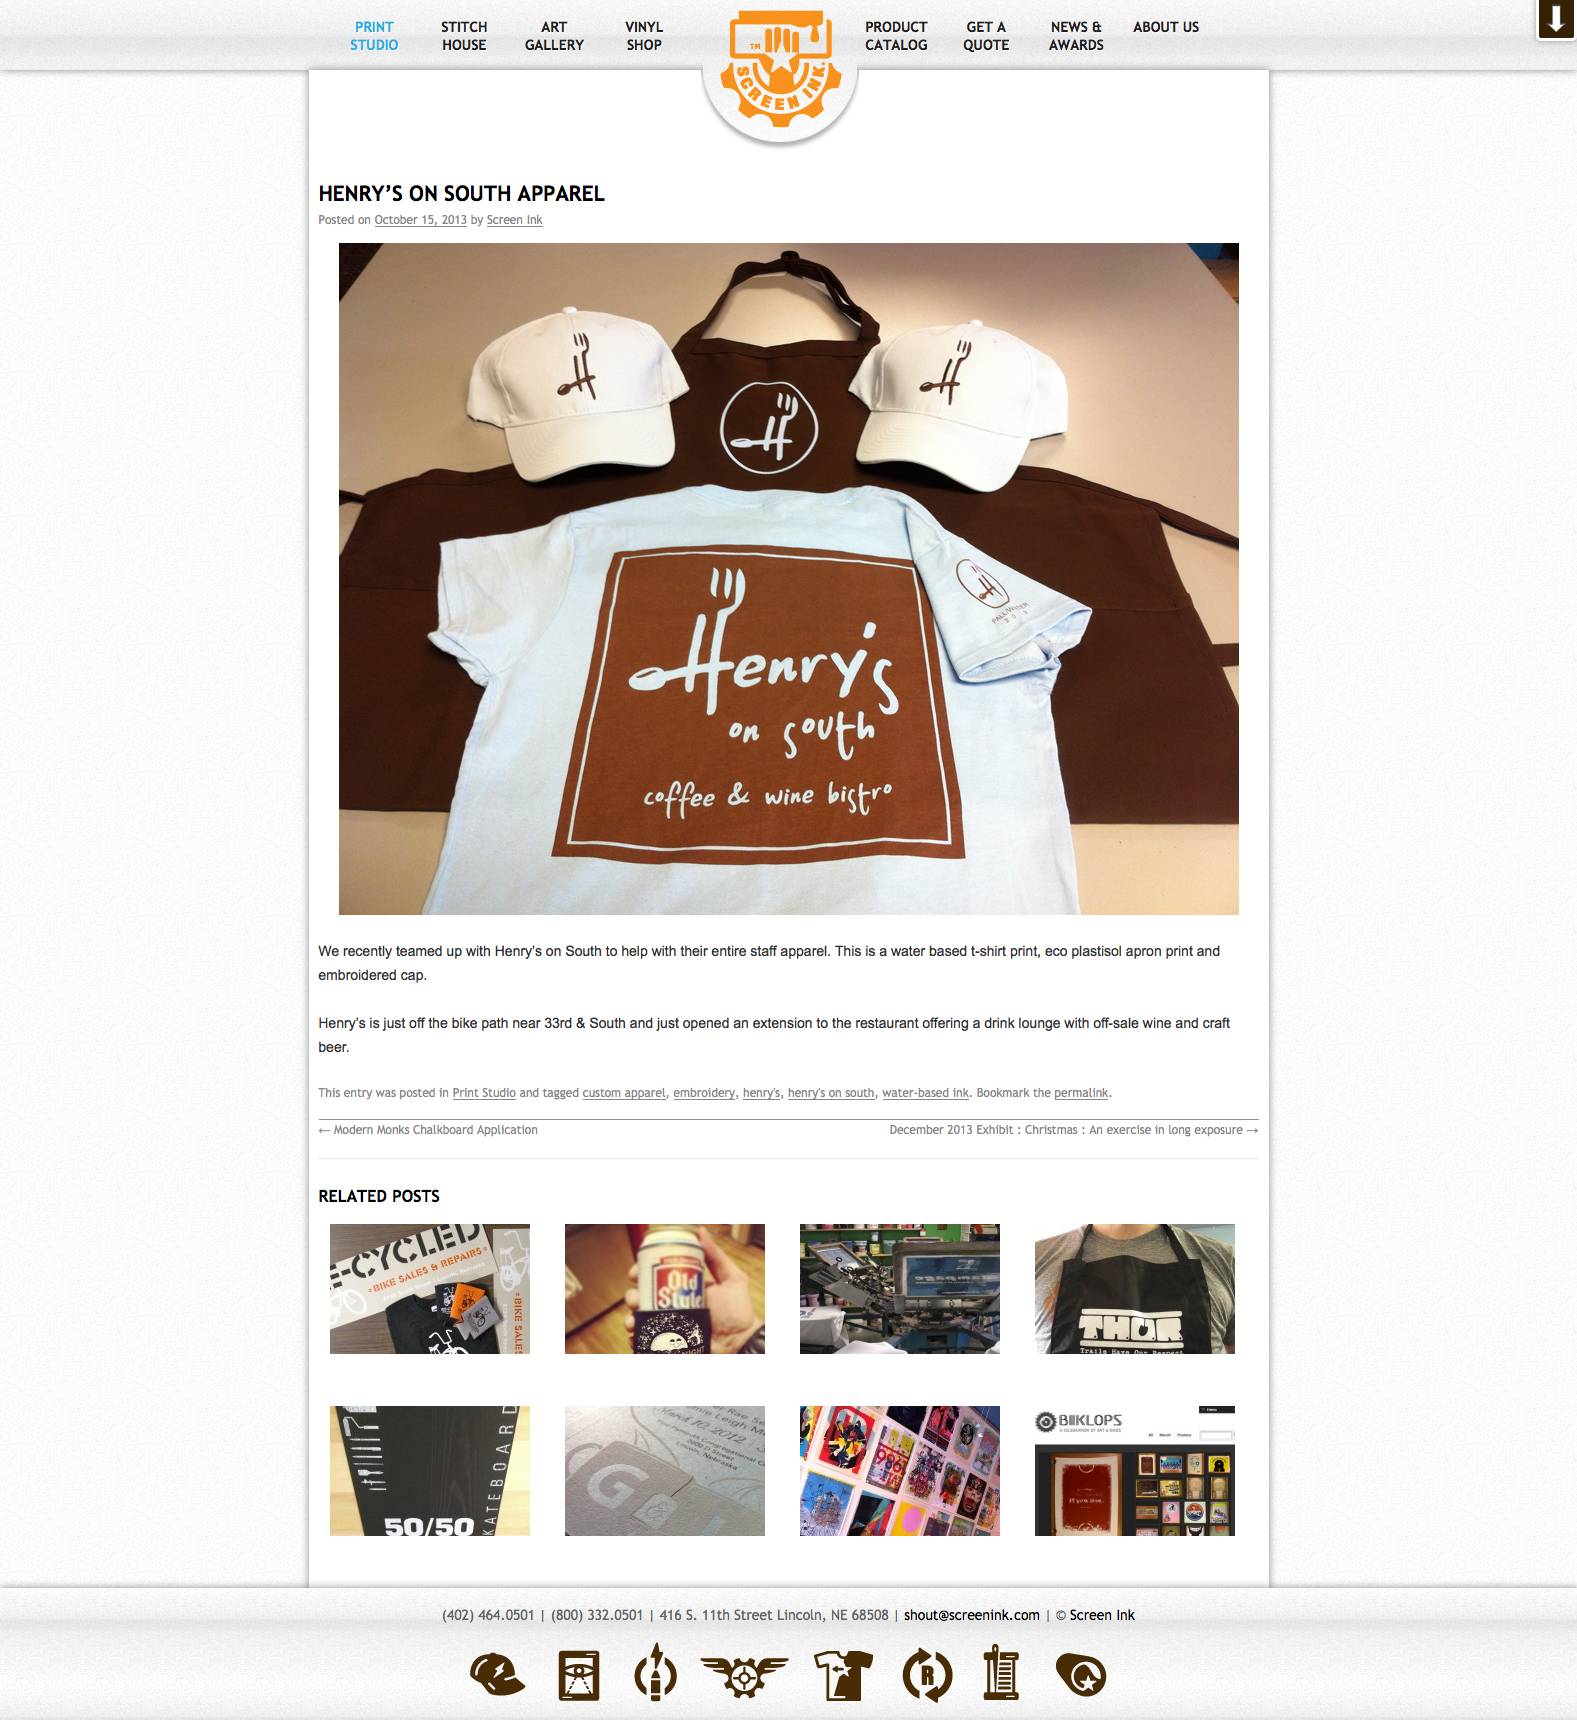 Screen_Ink_Henry’s_on_South_apparel_-_2014-10-29_11.05.18